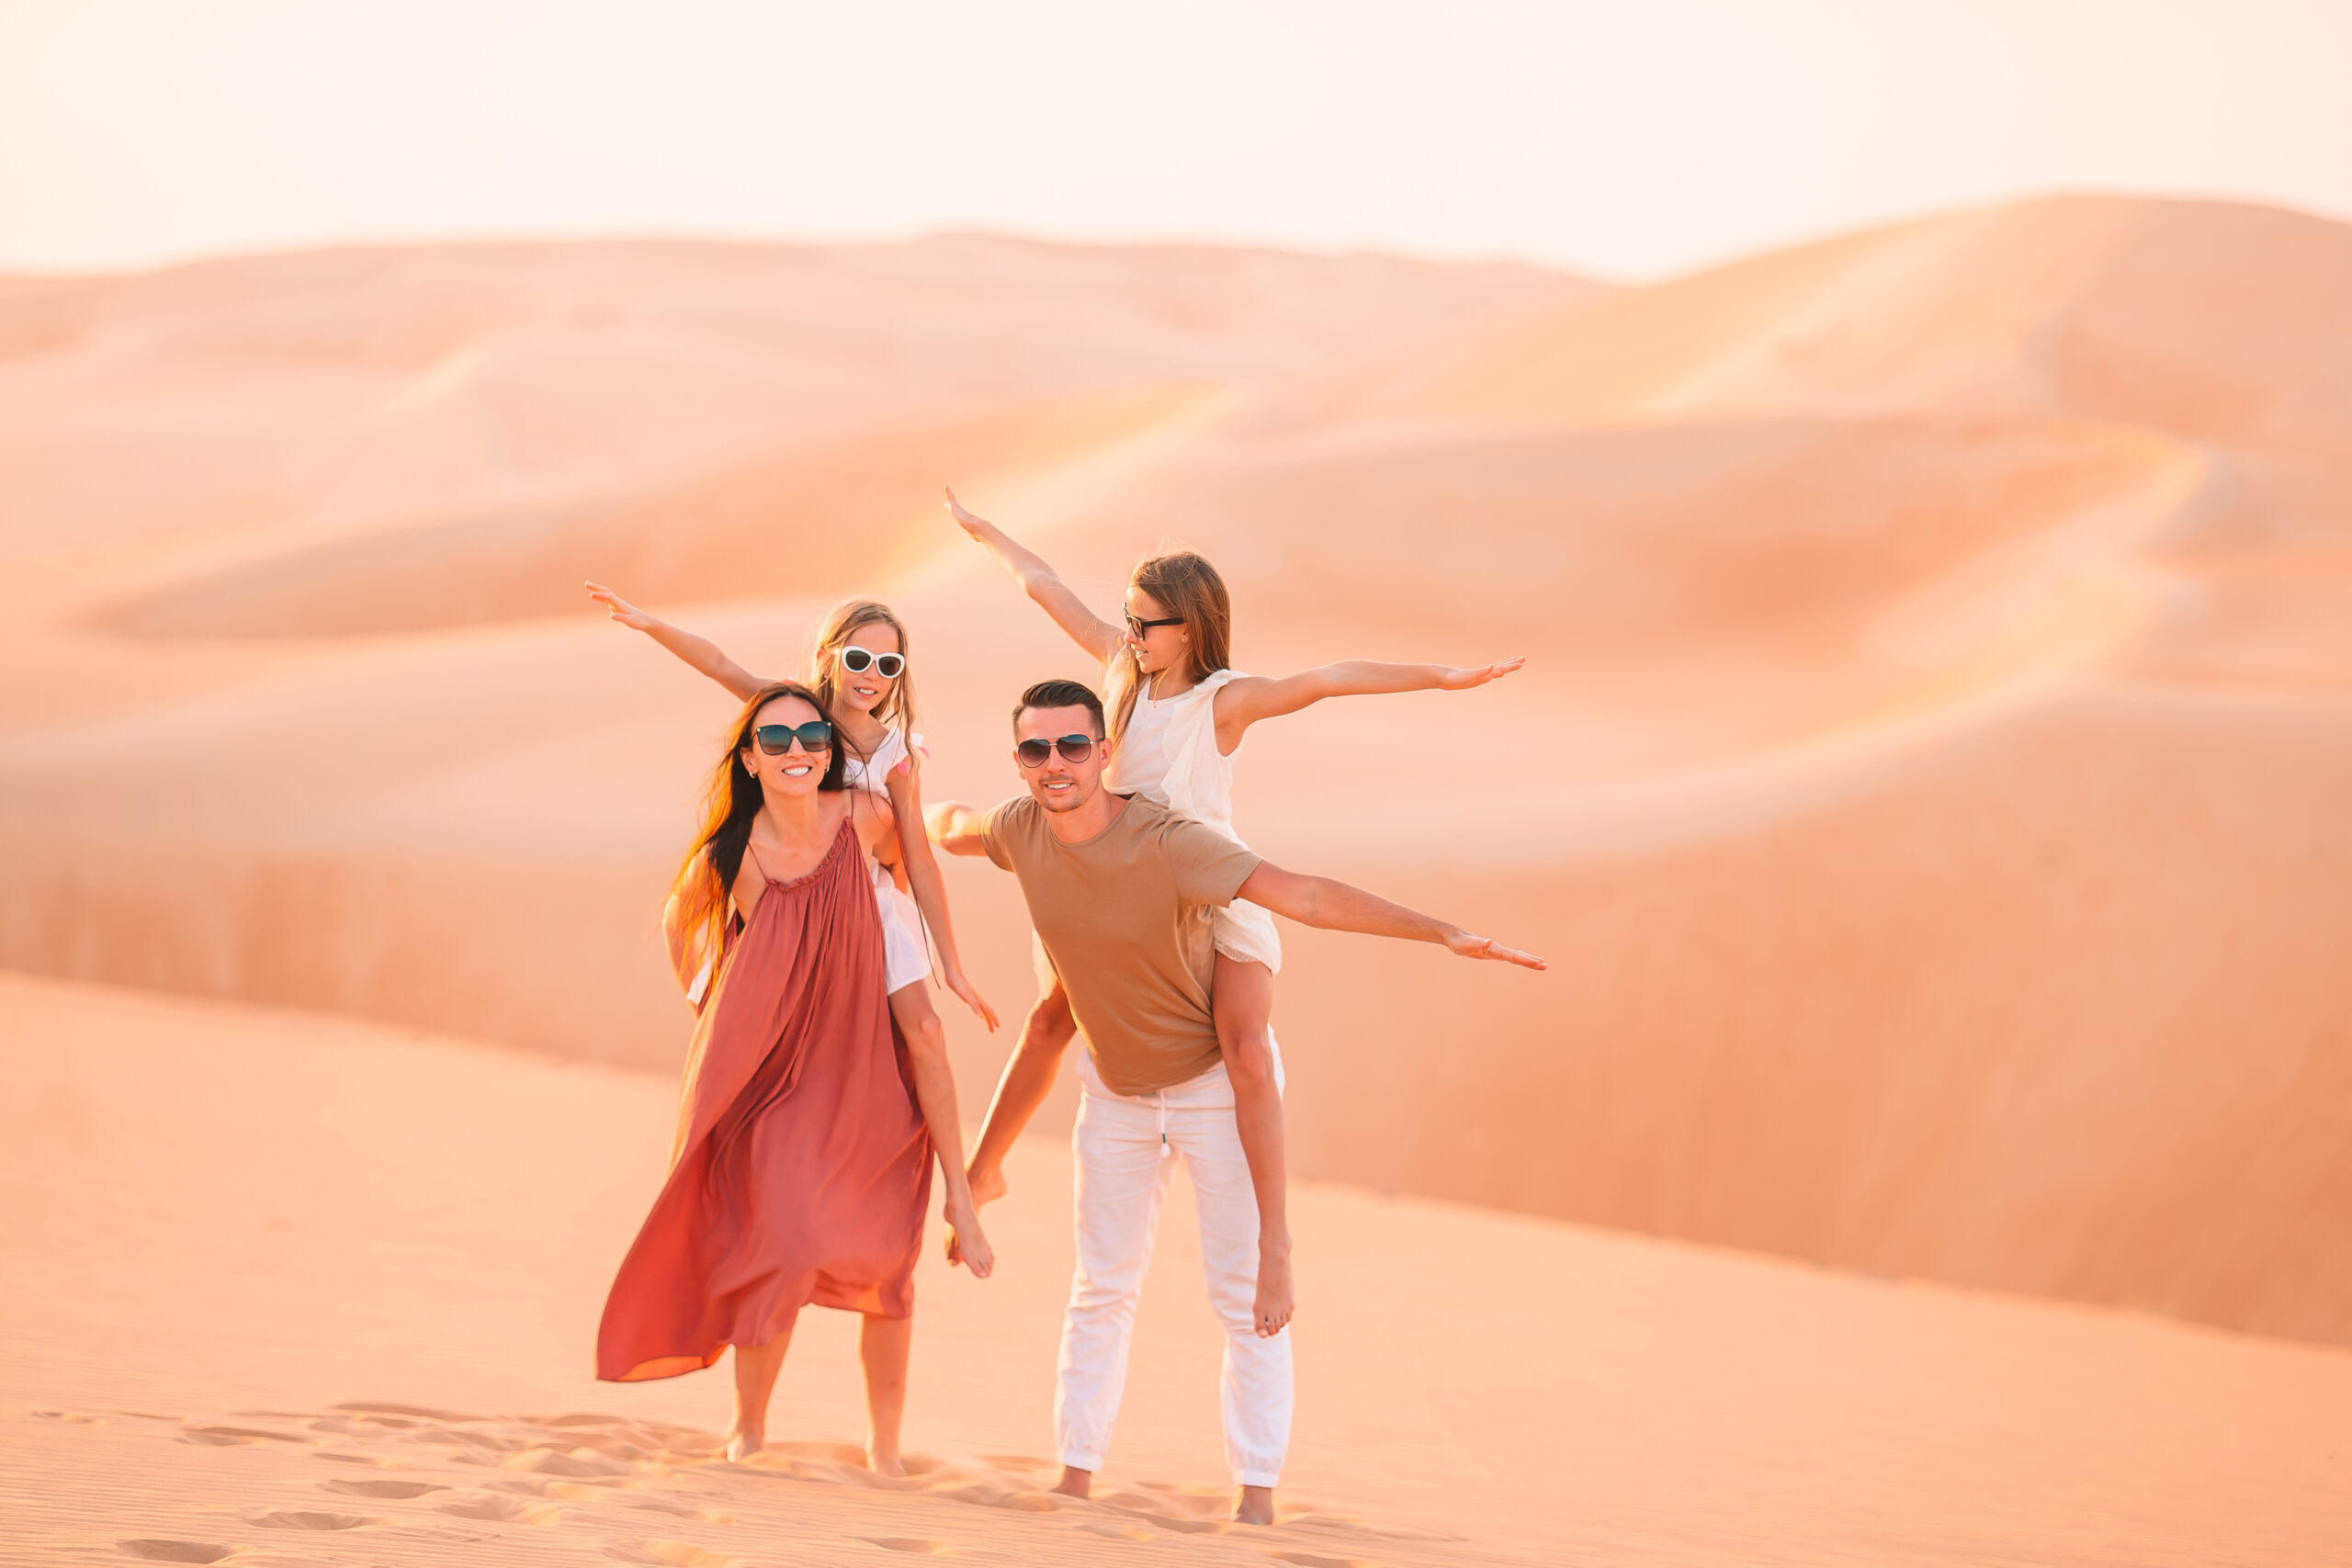 What to do in Dubai with kids - Family in the desert